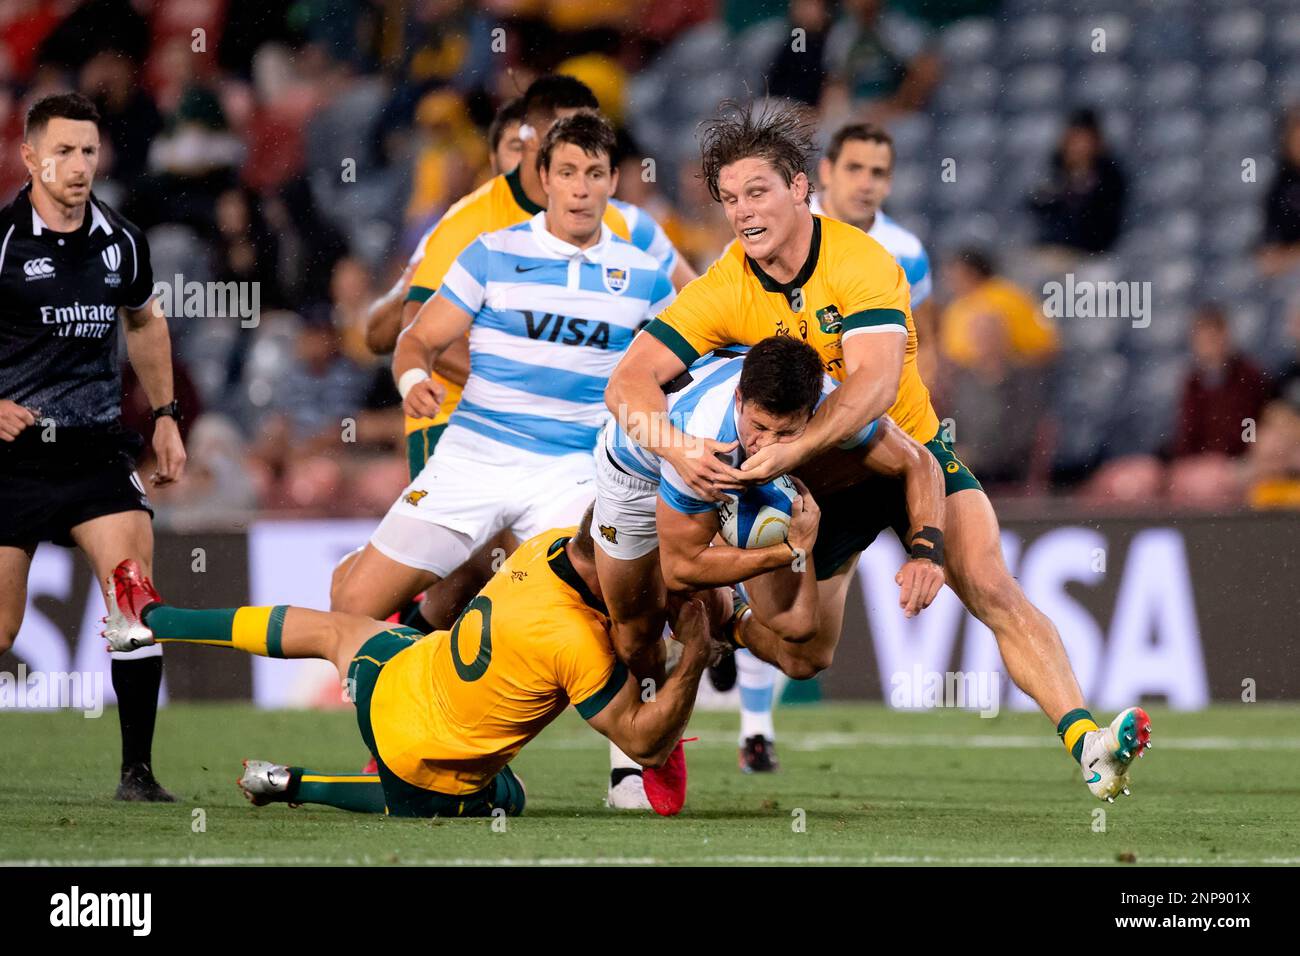 NEWCASTLE, AUSTRALIA - NOVEMBER 21: Bautista Delguy of the Pumas hit in a  big tackle by Michael Hooper of the Wallabies during the Tri-Nations round  4 rugby match between the Argentina Pumas